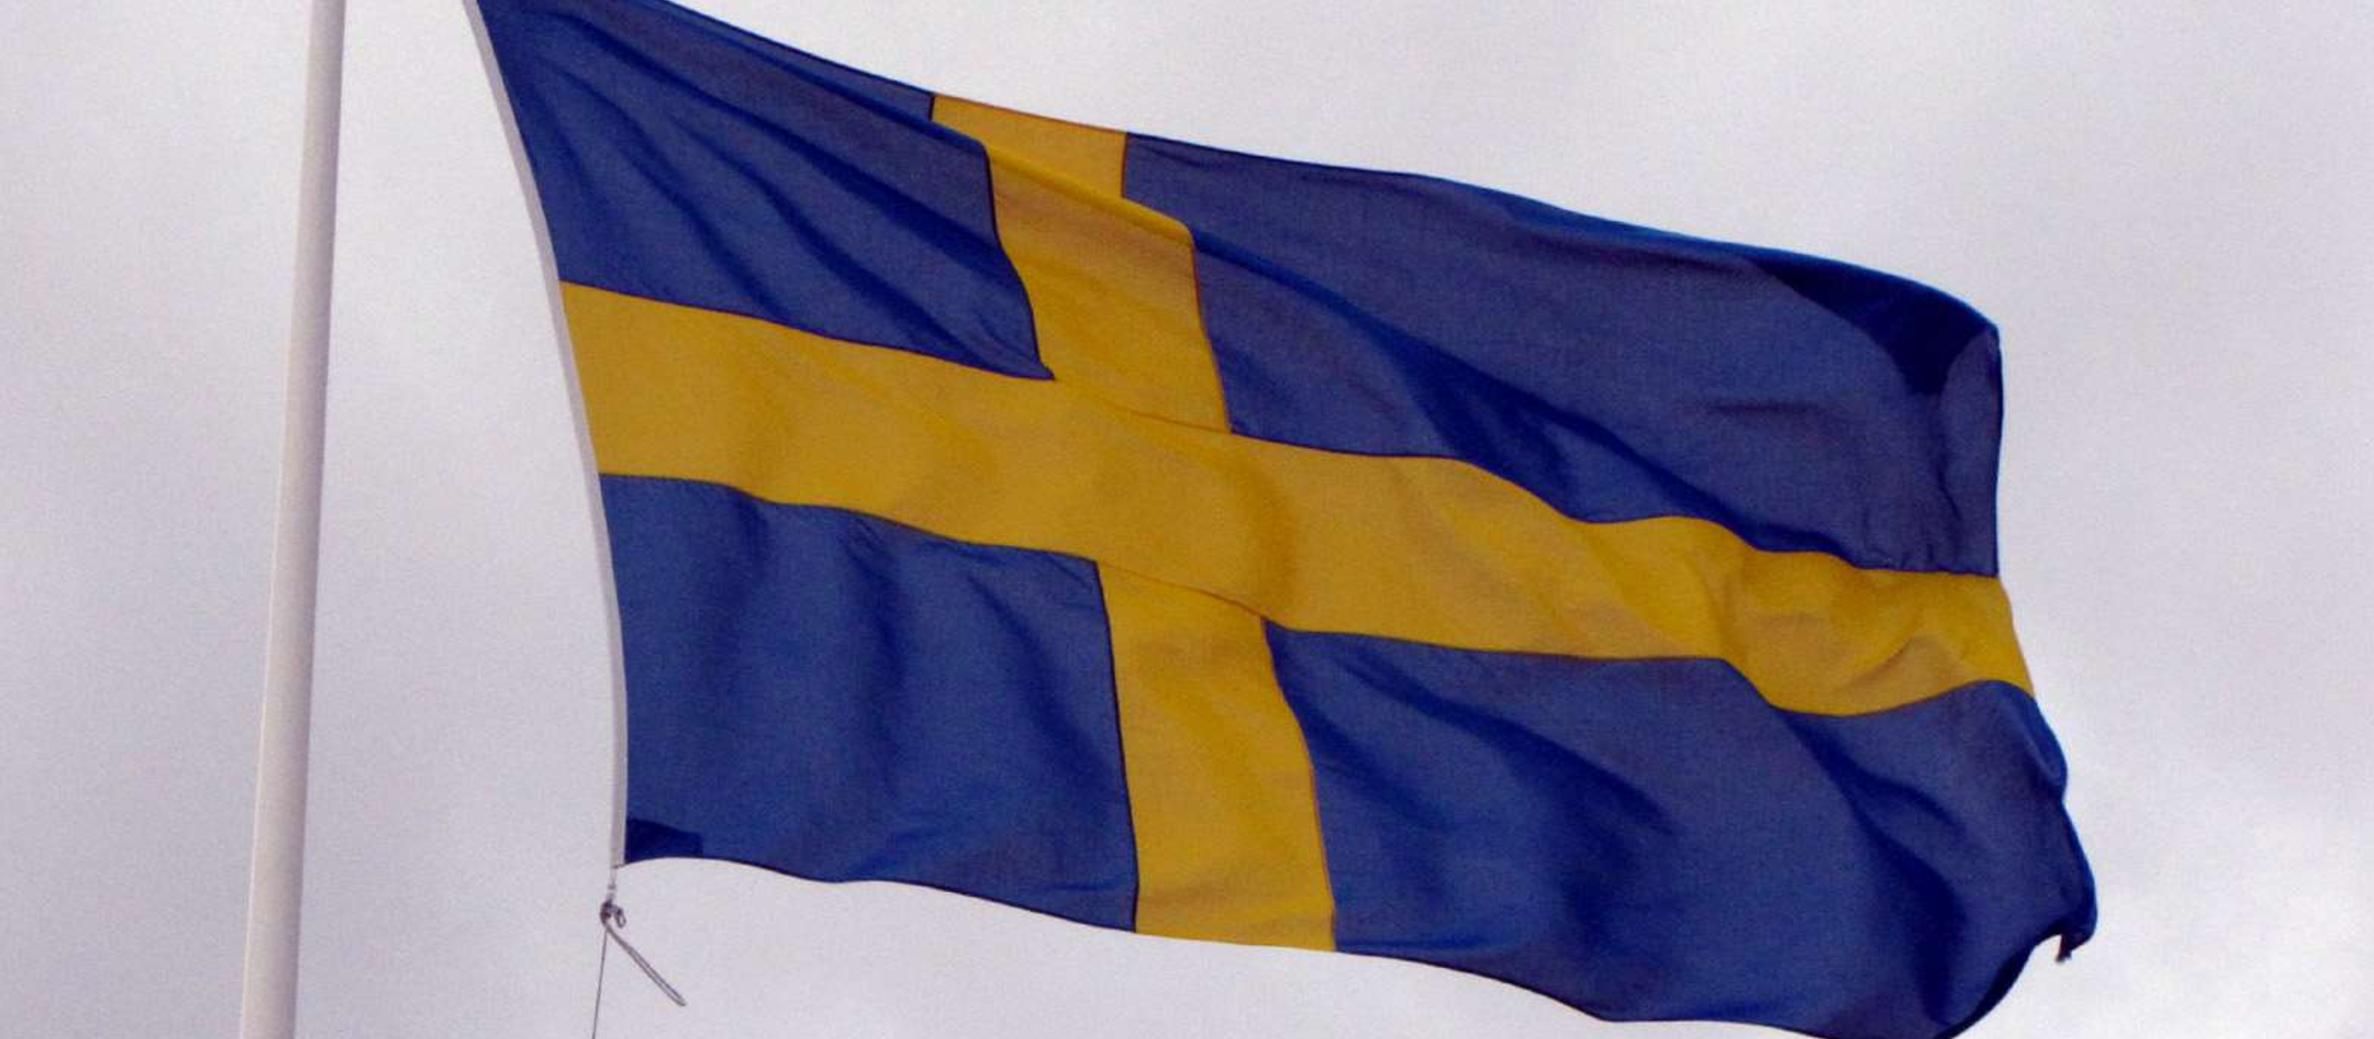 Sweden’s synagogues temporarily closed amid terror threat